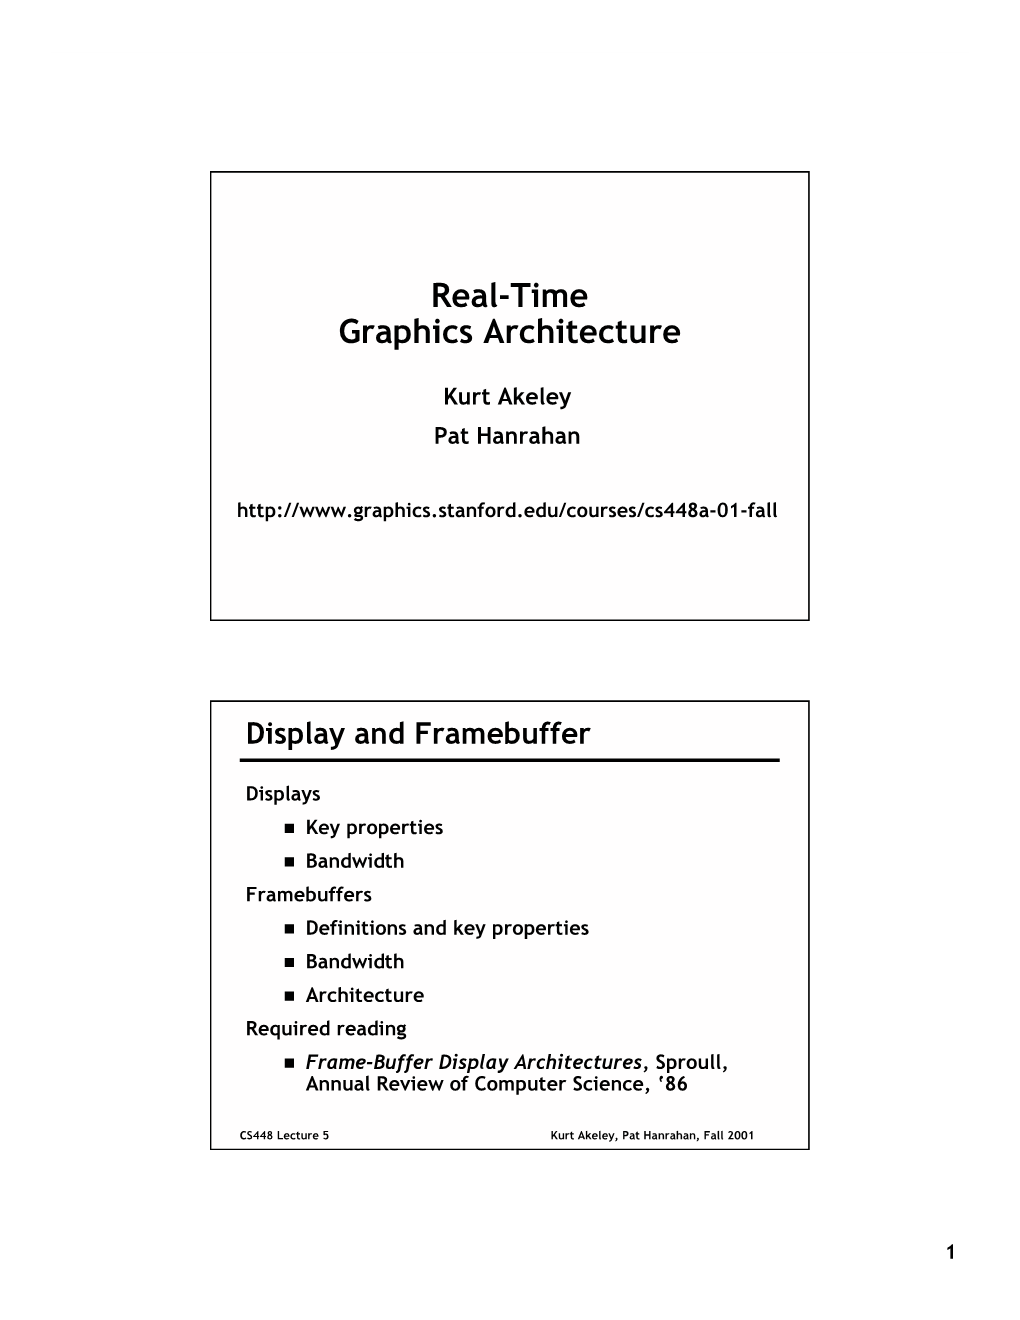 Real-Time Graphics Architecture